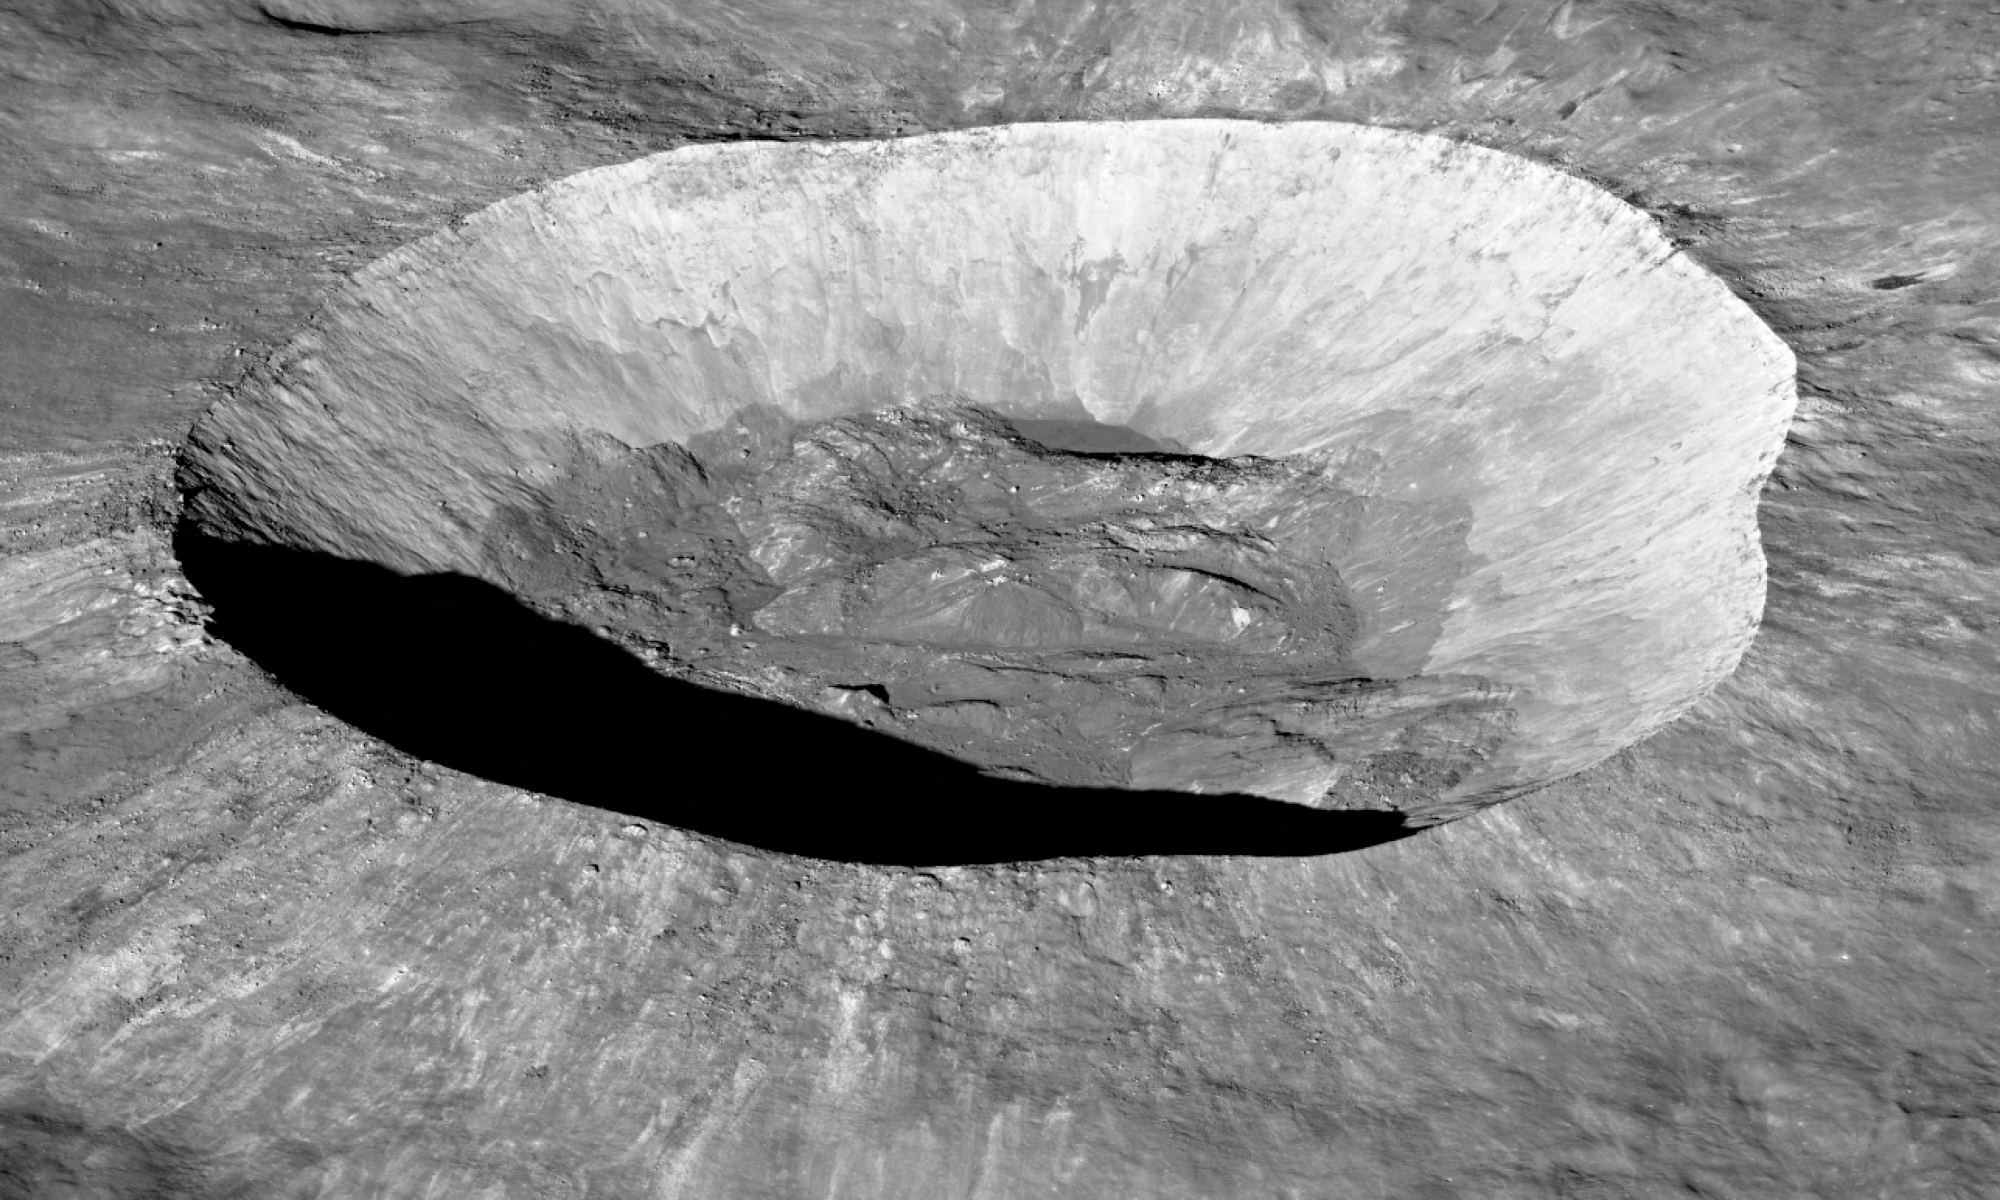 Giordano Bruno crater on the Moon, as seen by the Lunar Reconnaissance Orbiter. This young crater sports impact rays that may help scientists as they consider landing sties for future Artemis missions. Courtesy: NASA/LRO.